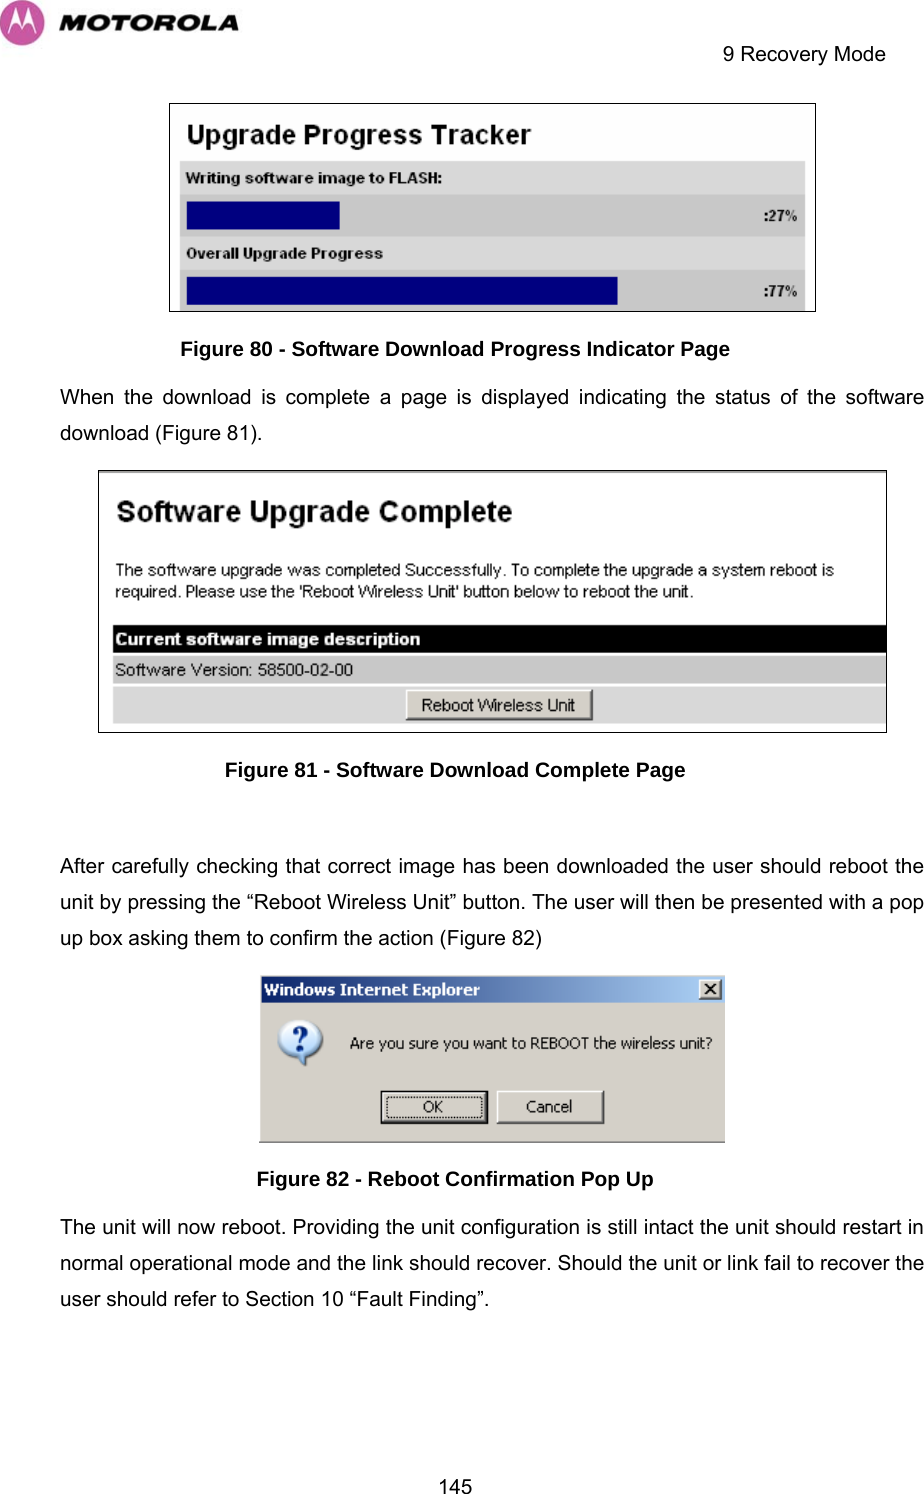     9 Recovery Mode  145 Figure 80 - Software Download Progress Indicator Page When the download is complete a page is displayed indicating the status of the software download (Figure 81).   Figure 81 - Software Download Complete Page  After carefully checking that correct image has been downloaded the user should reboot the unit by pressing the “Reboot Wireless Unit” button. The user will then be presented with a pop up box asking them to confirm the action (Figure 82)  Figure 82 - Reboot Confirmation Pop Up The unit will now reboot. Providing the unit configuration is still intact the unit should restart in normal operational mode and the link should recover. Should the unit or link fail to recover the user should refer to Section 10 “Fault Finding”.  